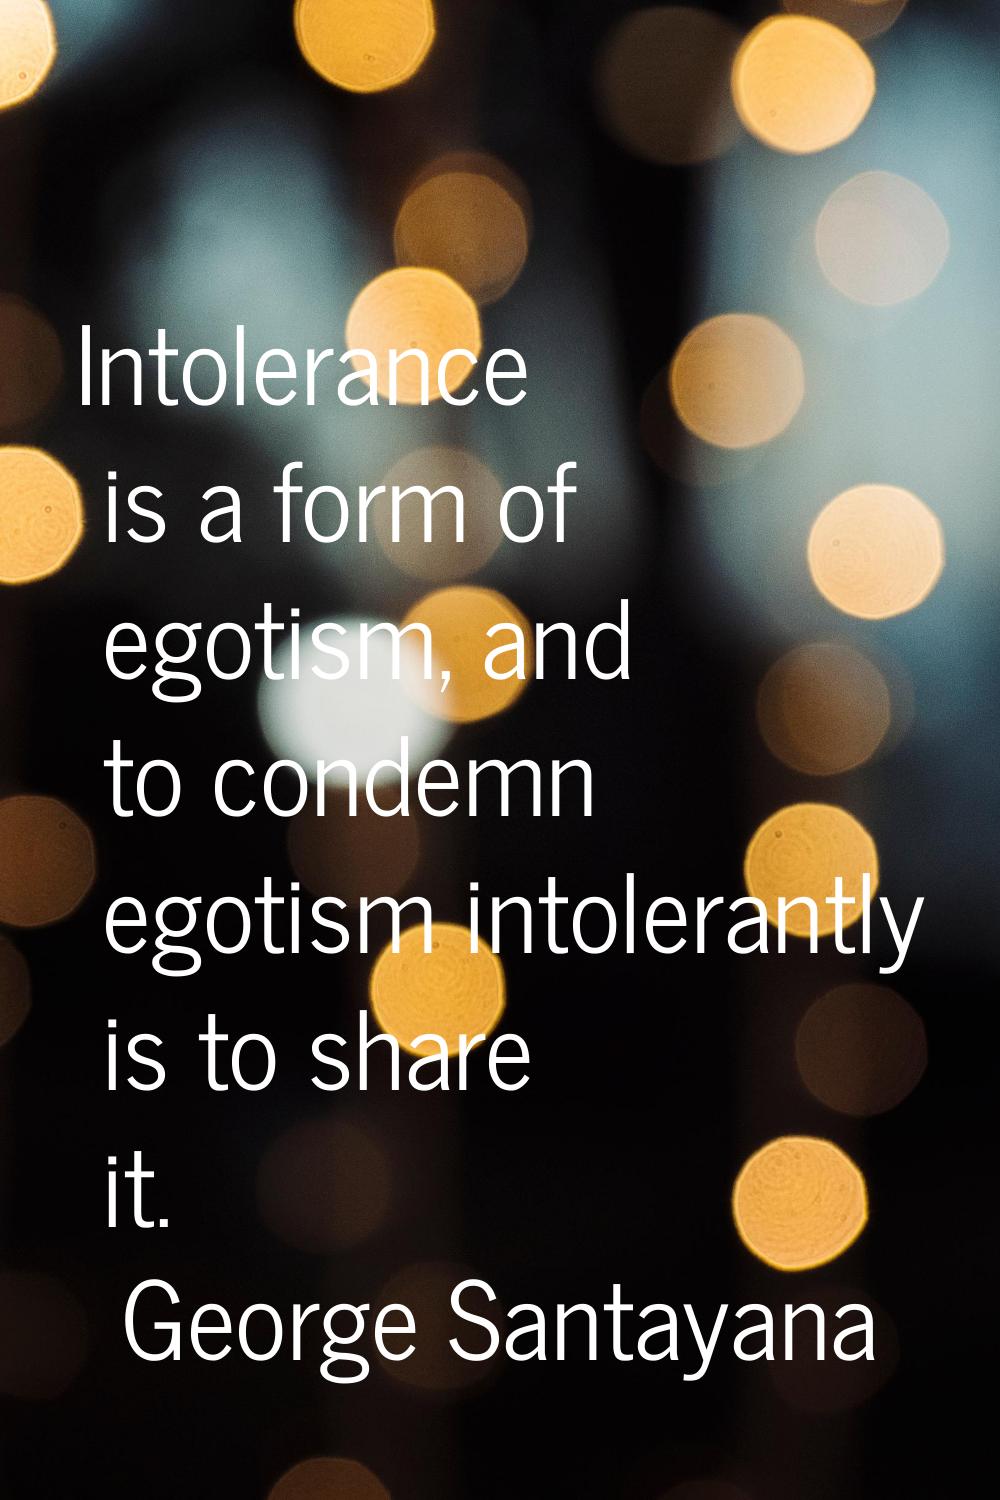 Intolerance is a form of egotism, and to condemn egotism intolerantly is to share it.